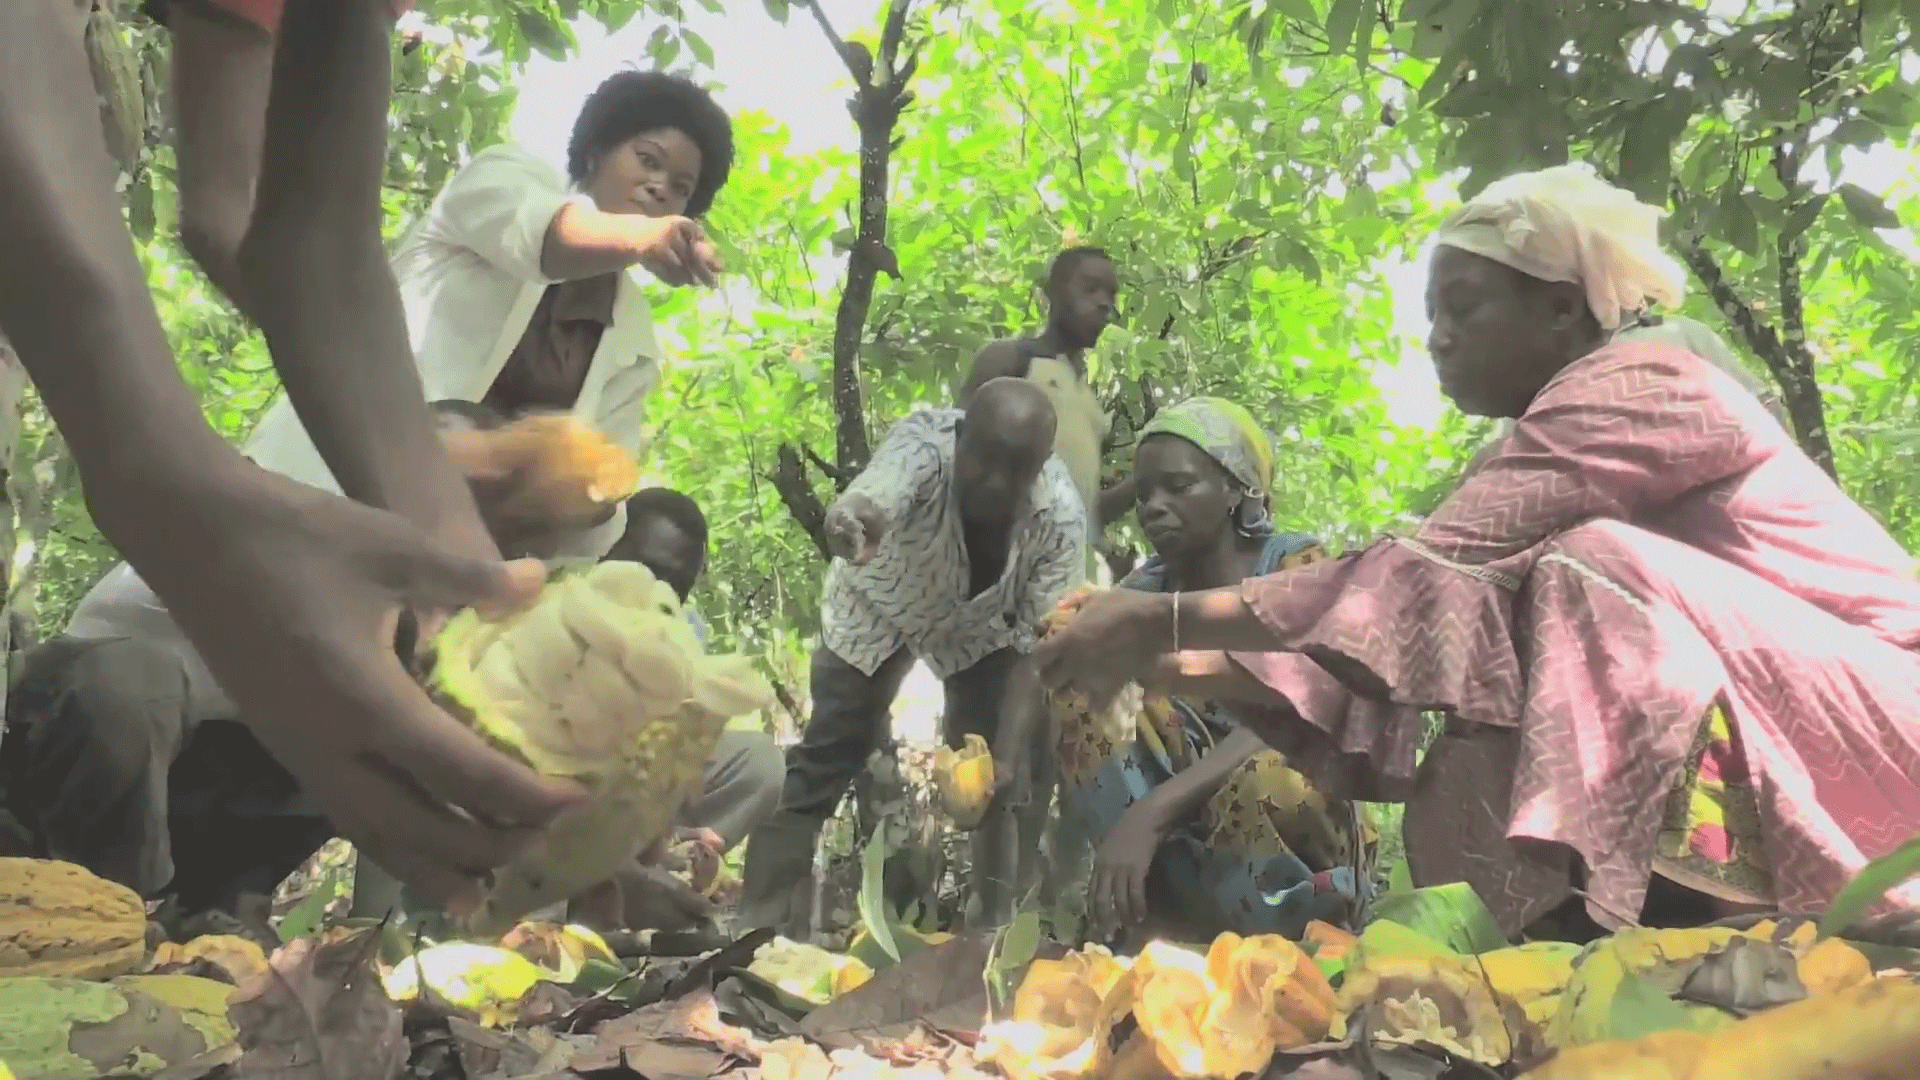 Still from the video "On the road to a sustainable cocoa sector"